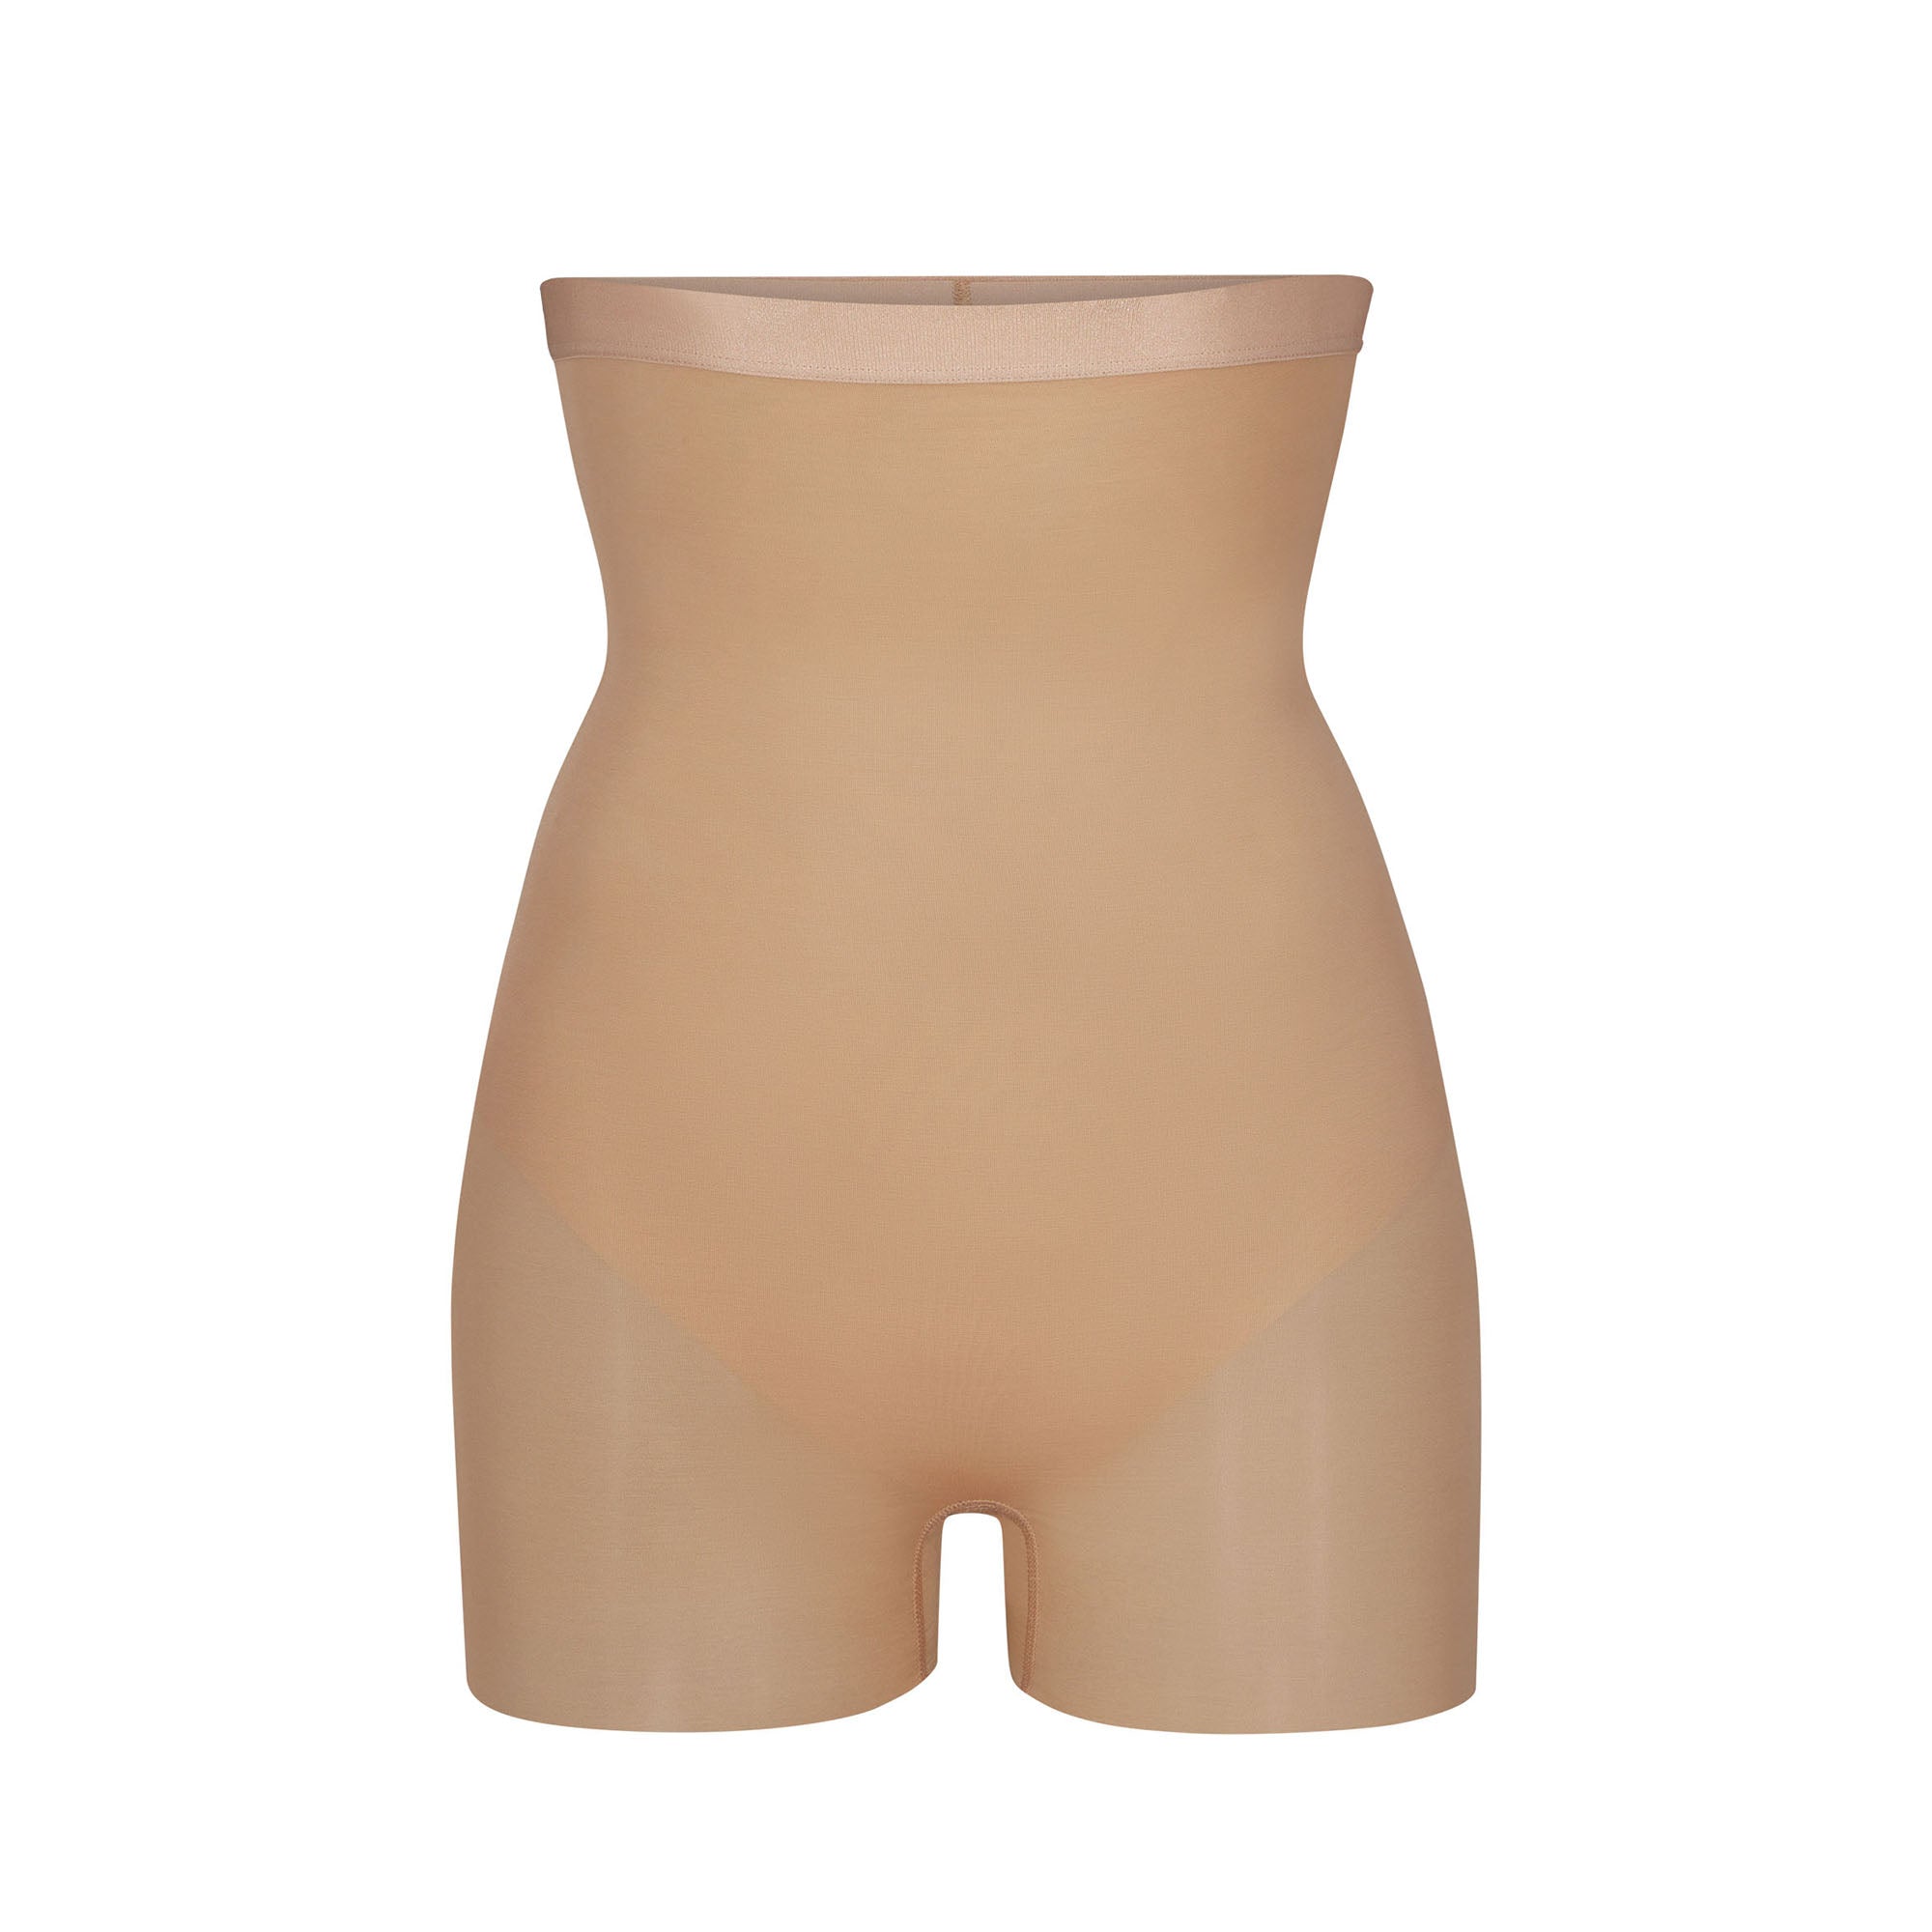 BARELY THERE HIGH-WAISTED SHORTIE | CLAY